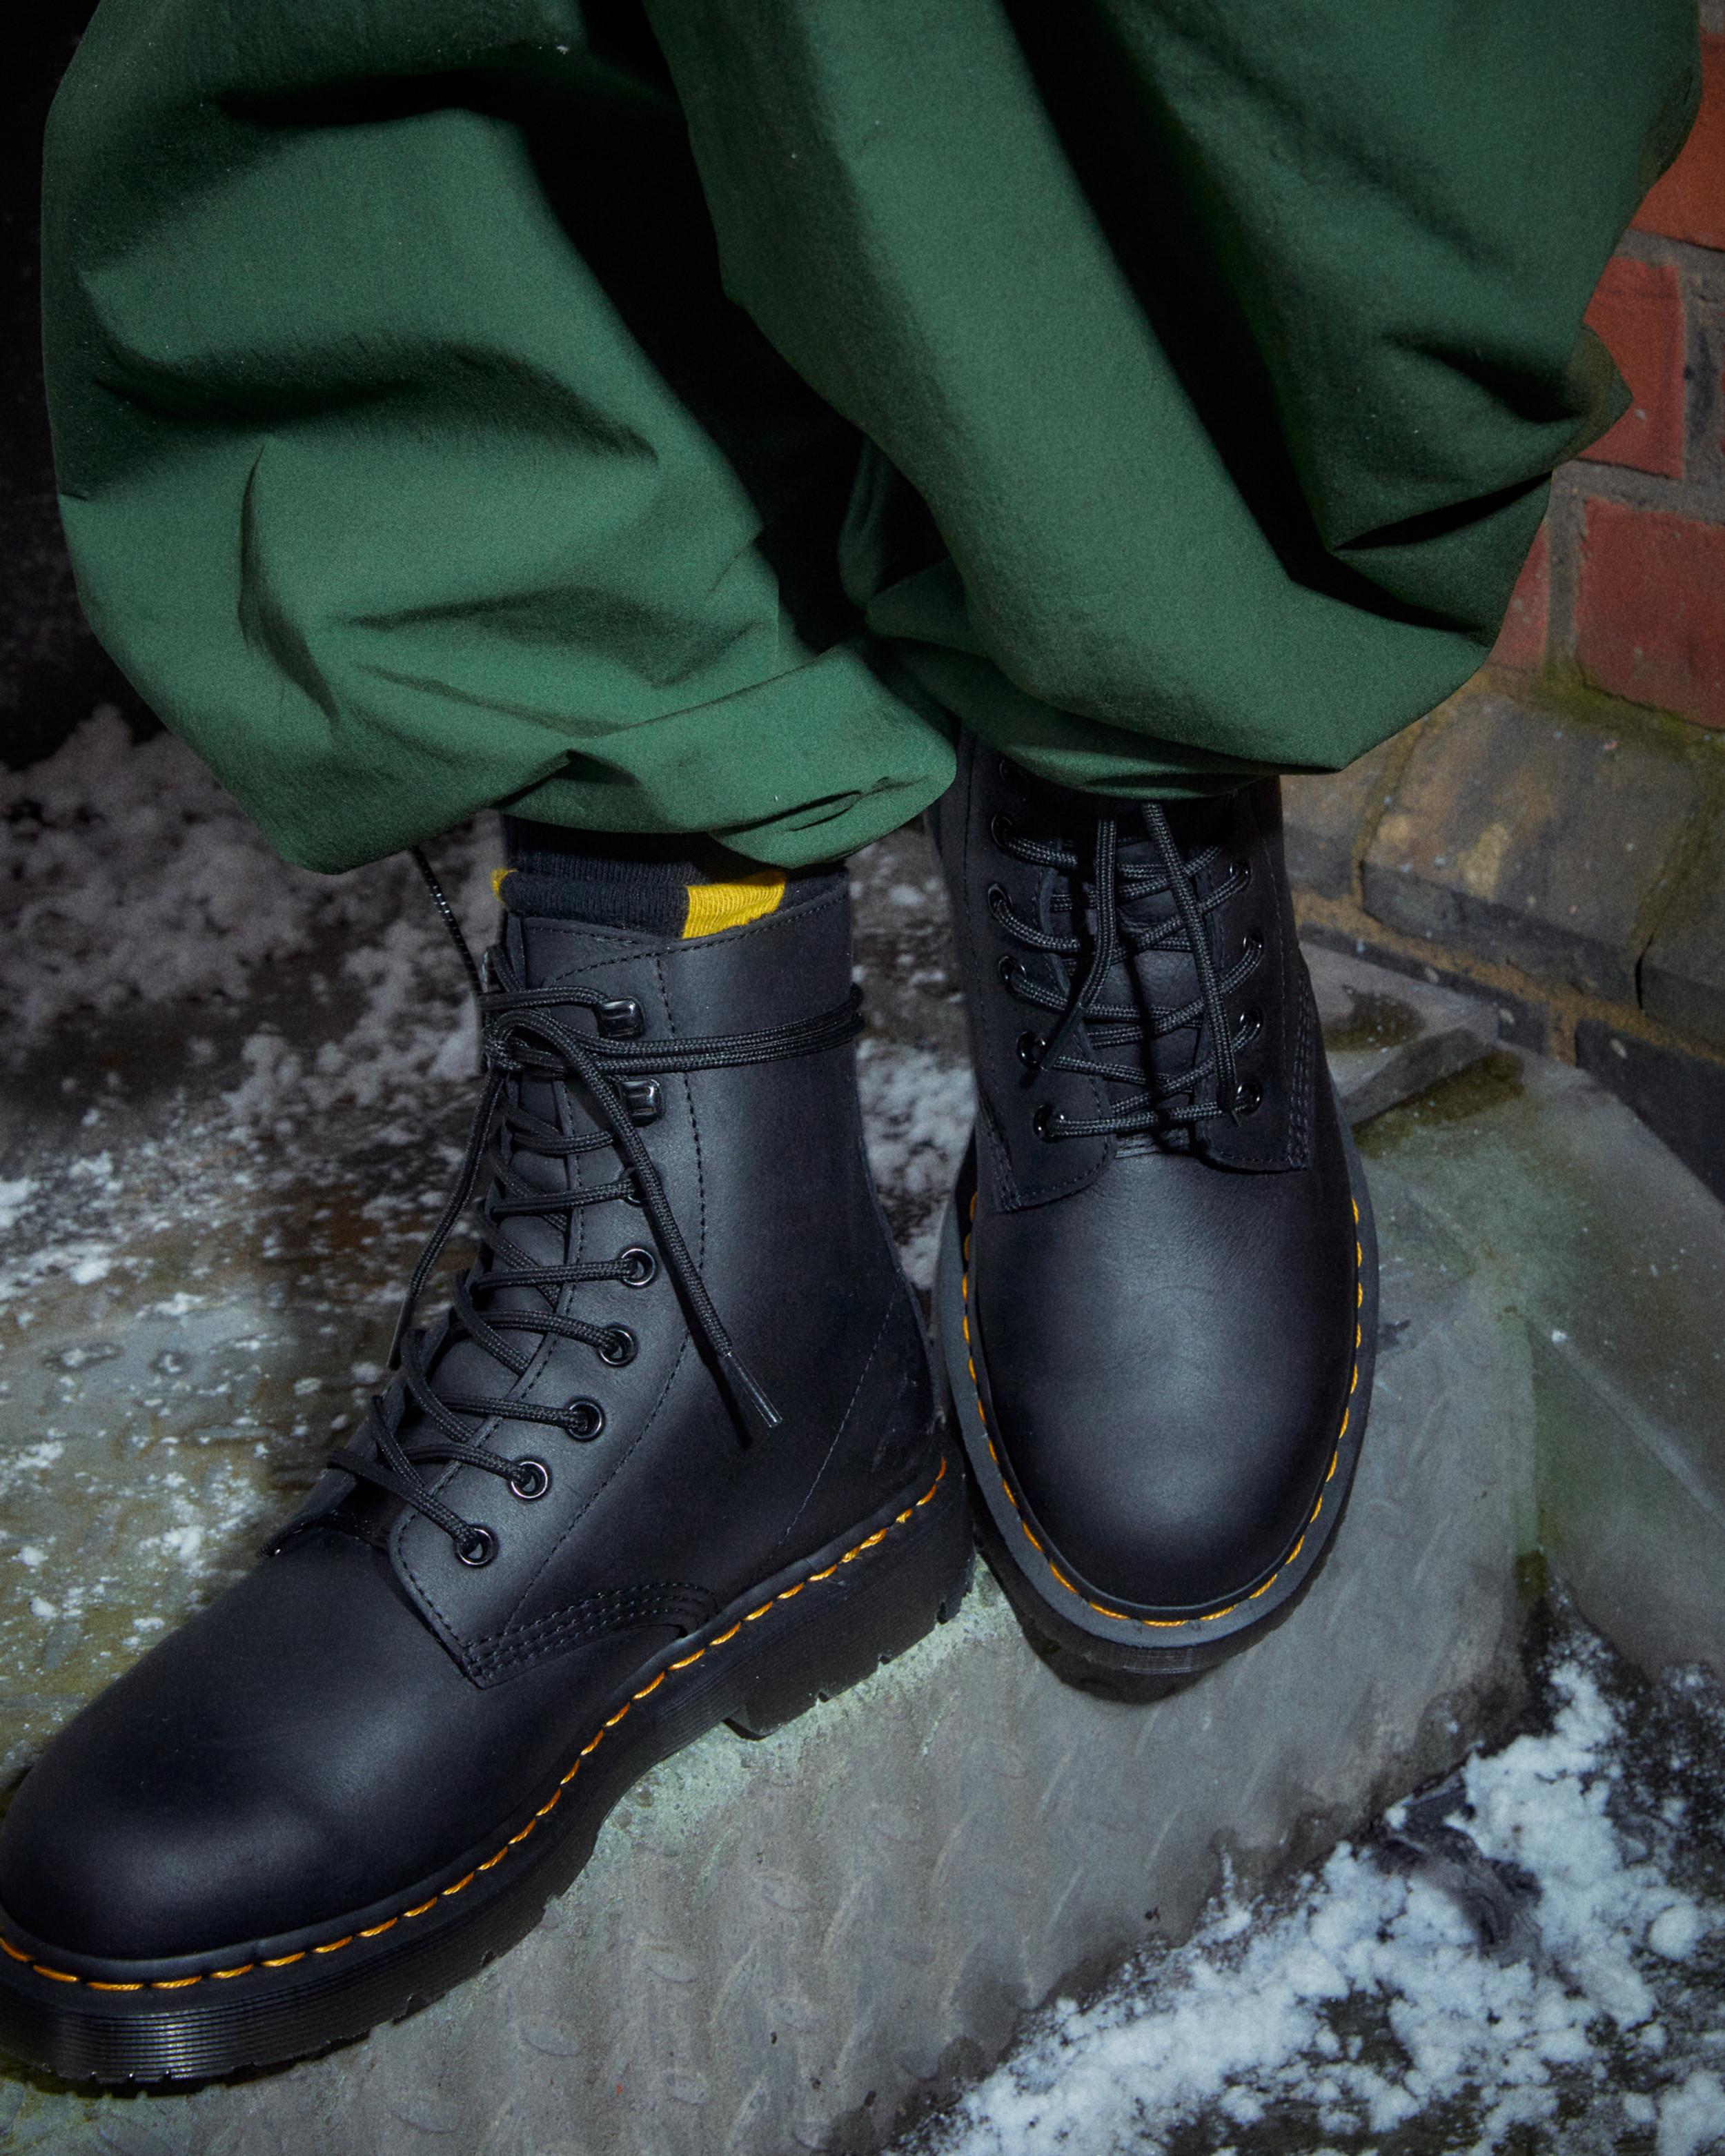 1460 Pascal Wintergrip Outlaw Leather Lace Up Boots in Black | Dr. Martens